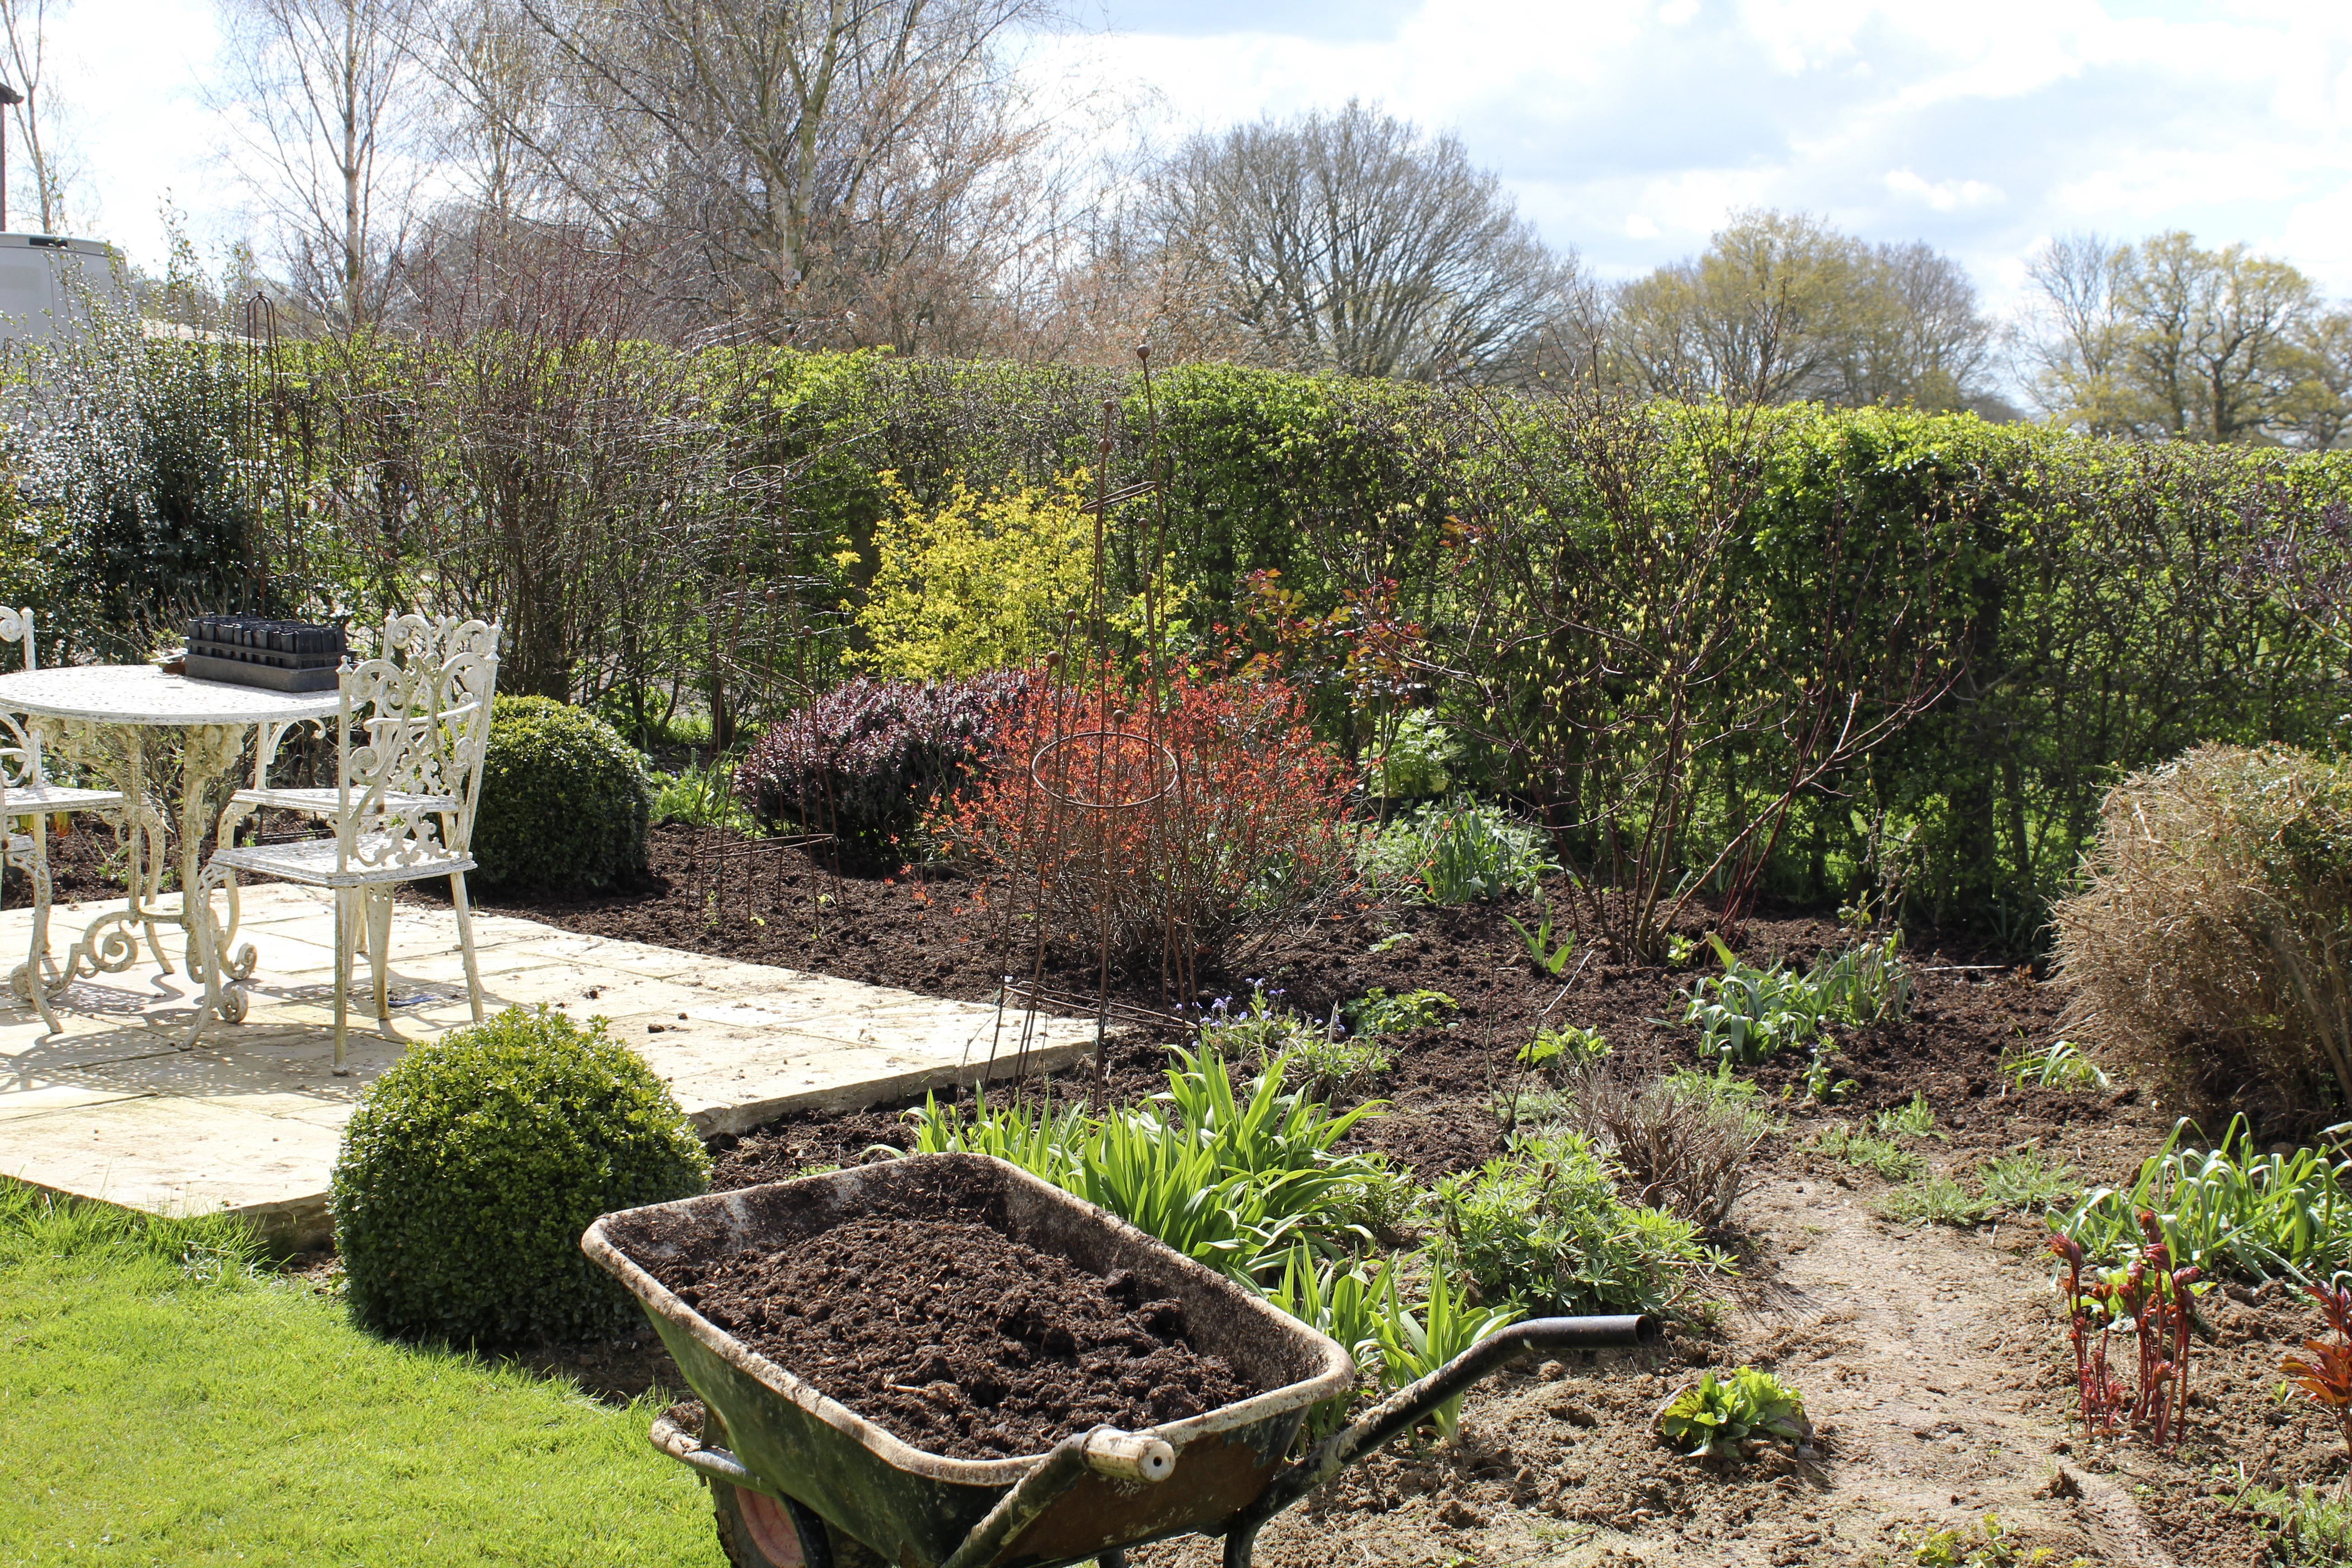 Adding a mulch in spring will help the soil structure, conserve moisture and help to keep the weeds down